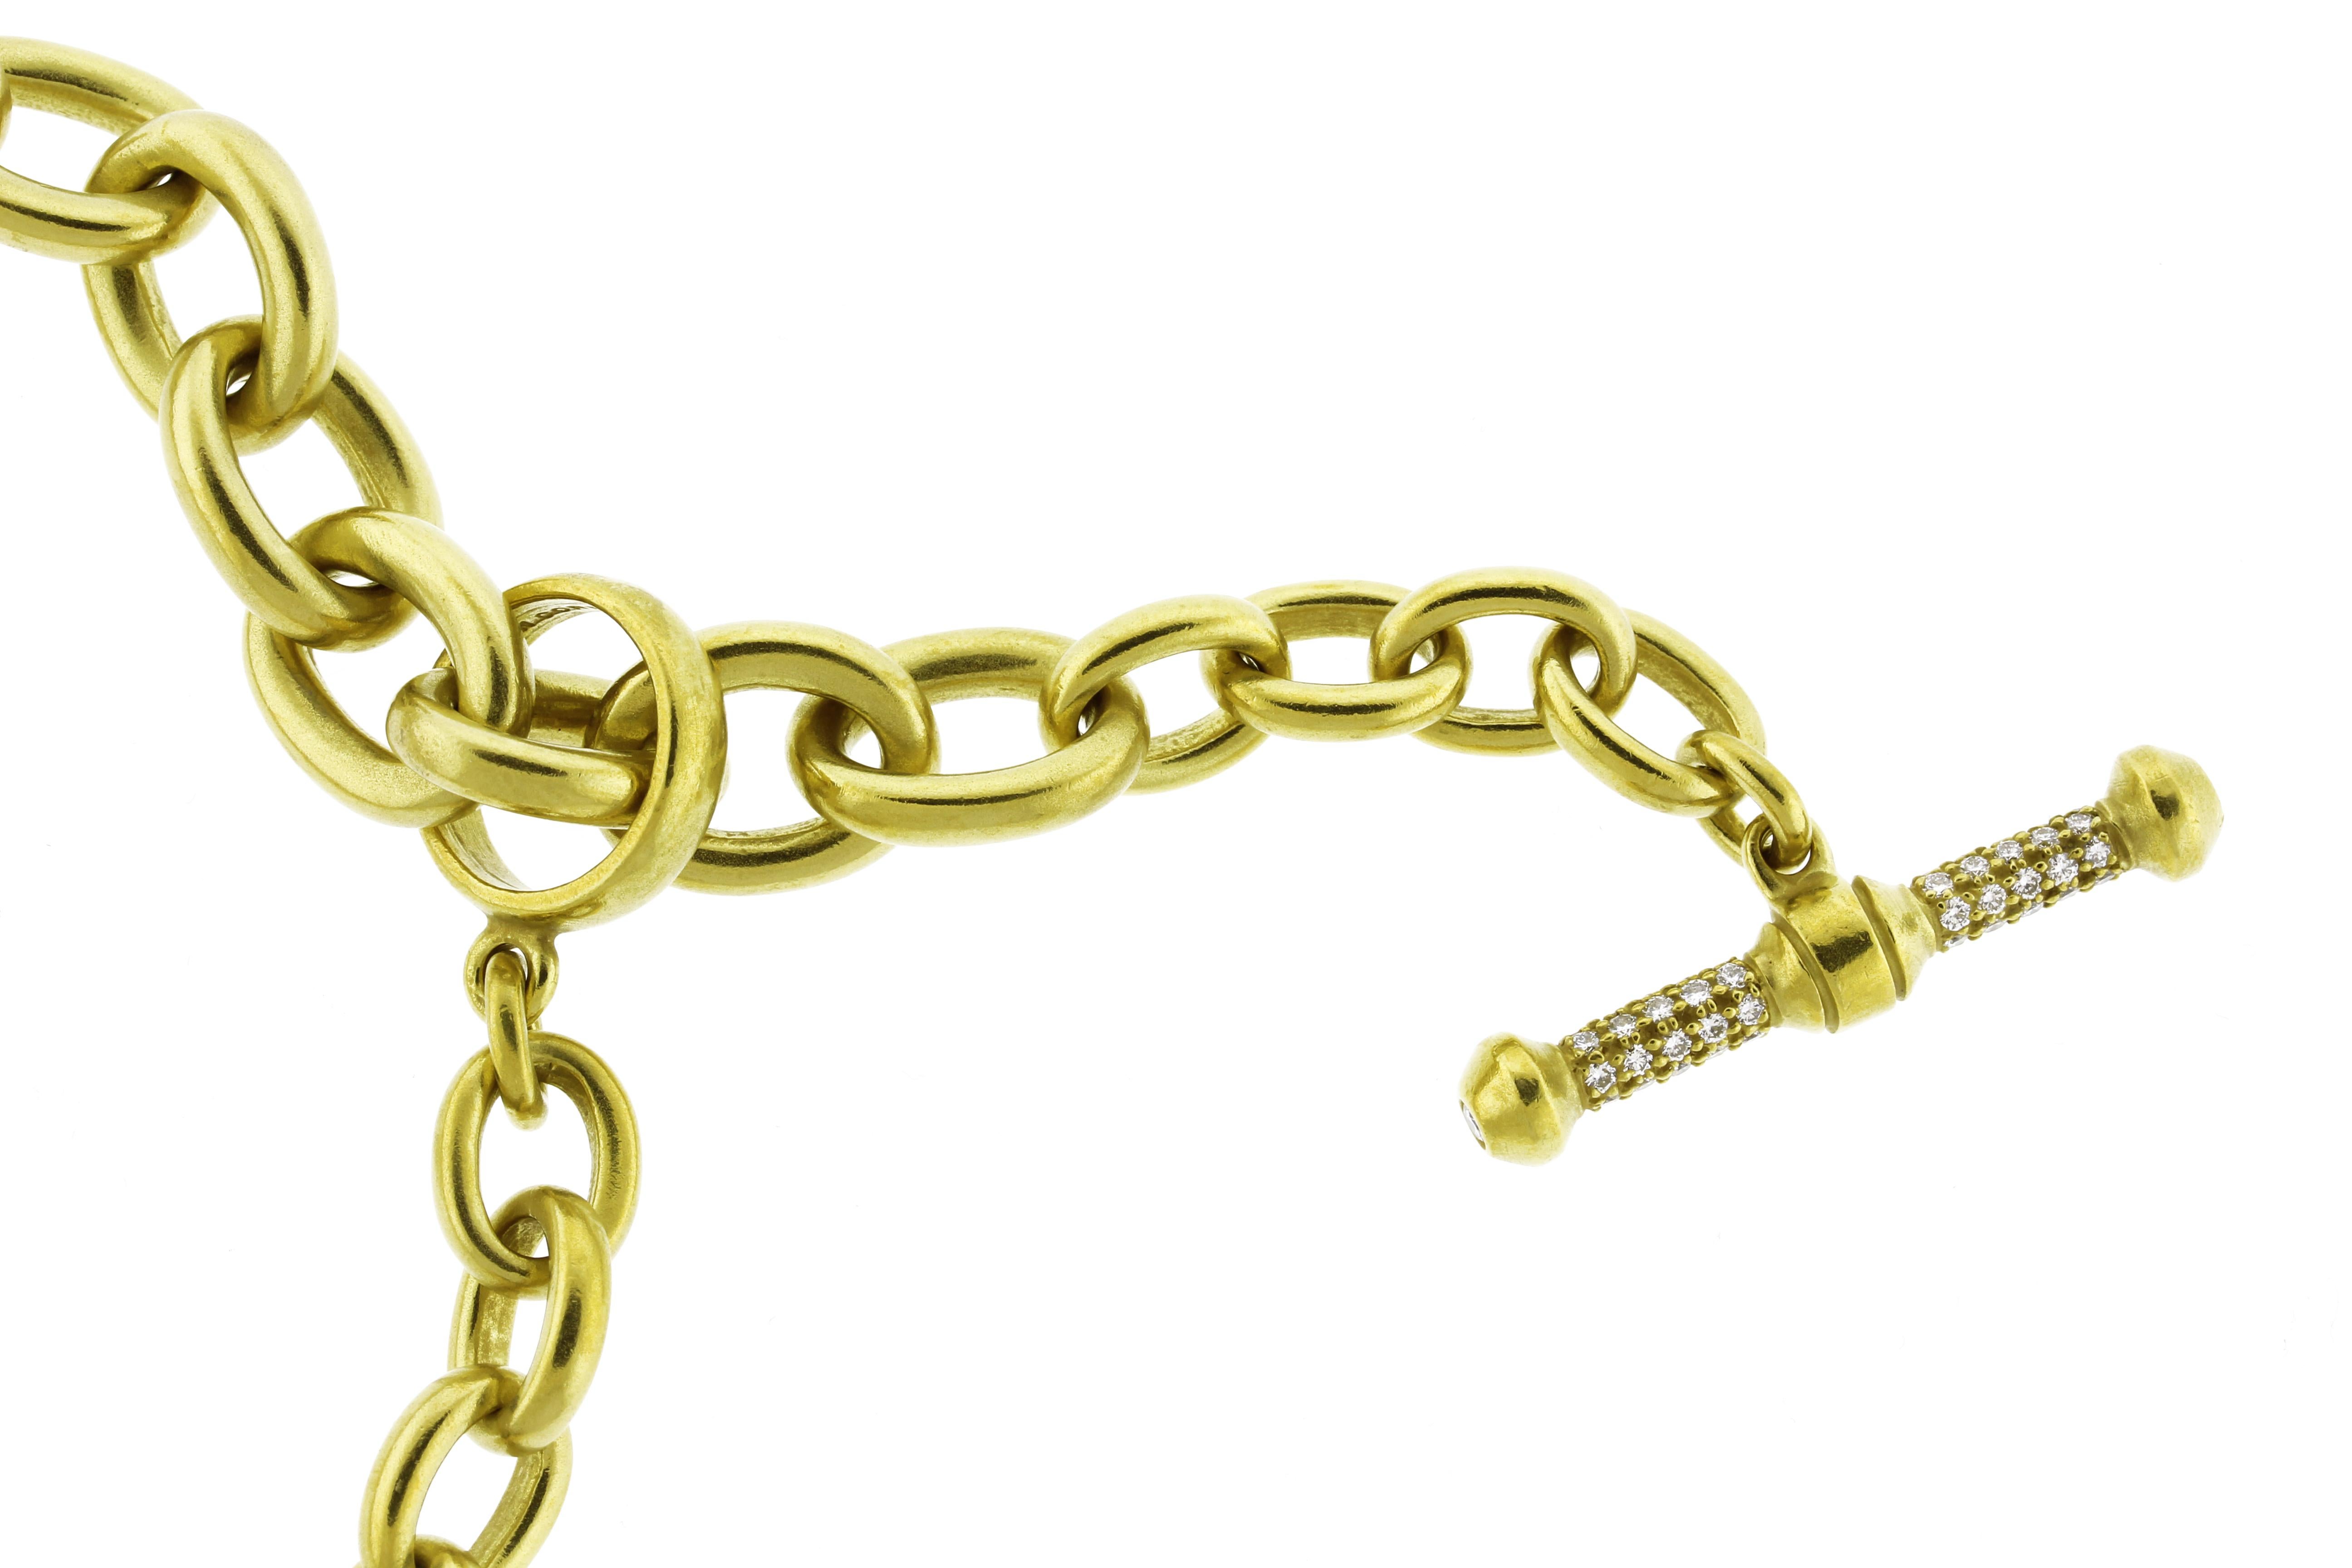 Brilliant Cut Barry Keiselstein Cord Gold Oval Chain Necklace with a Diamond Toggle For Sale